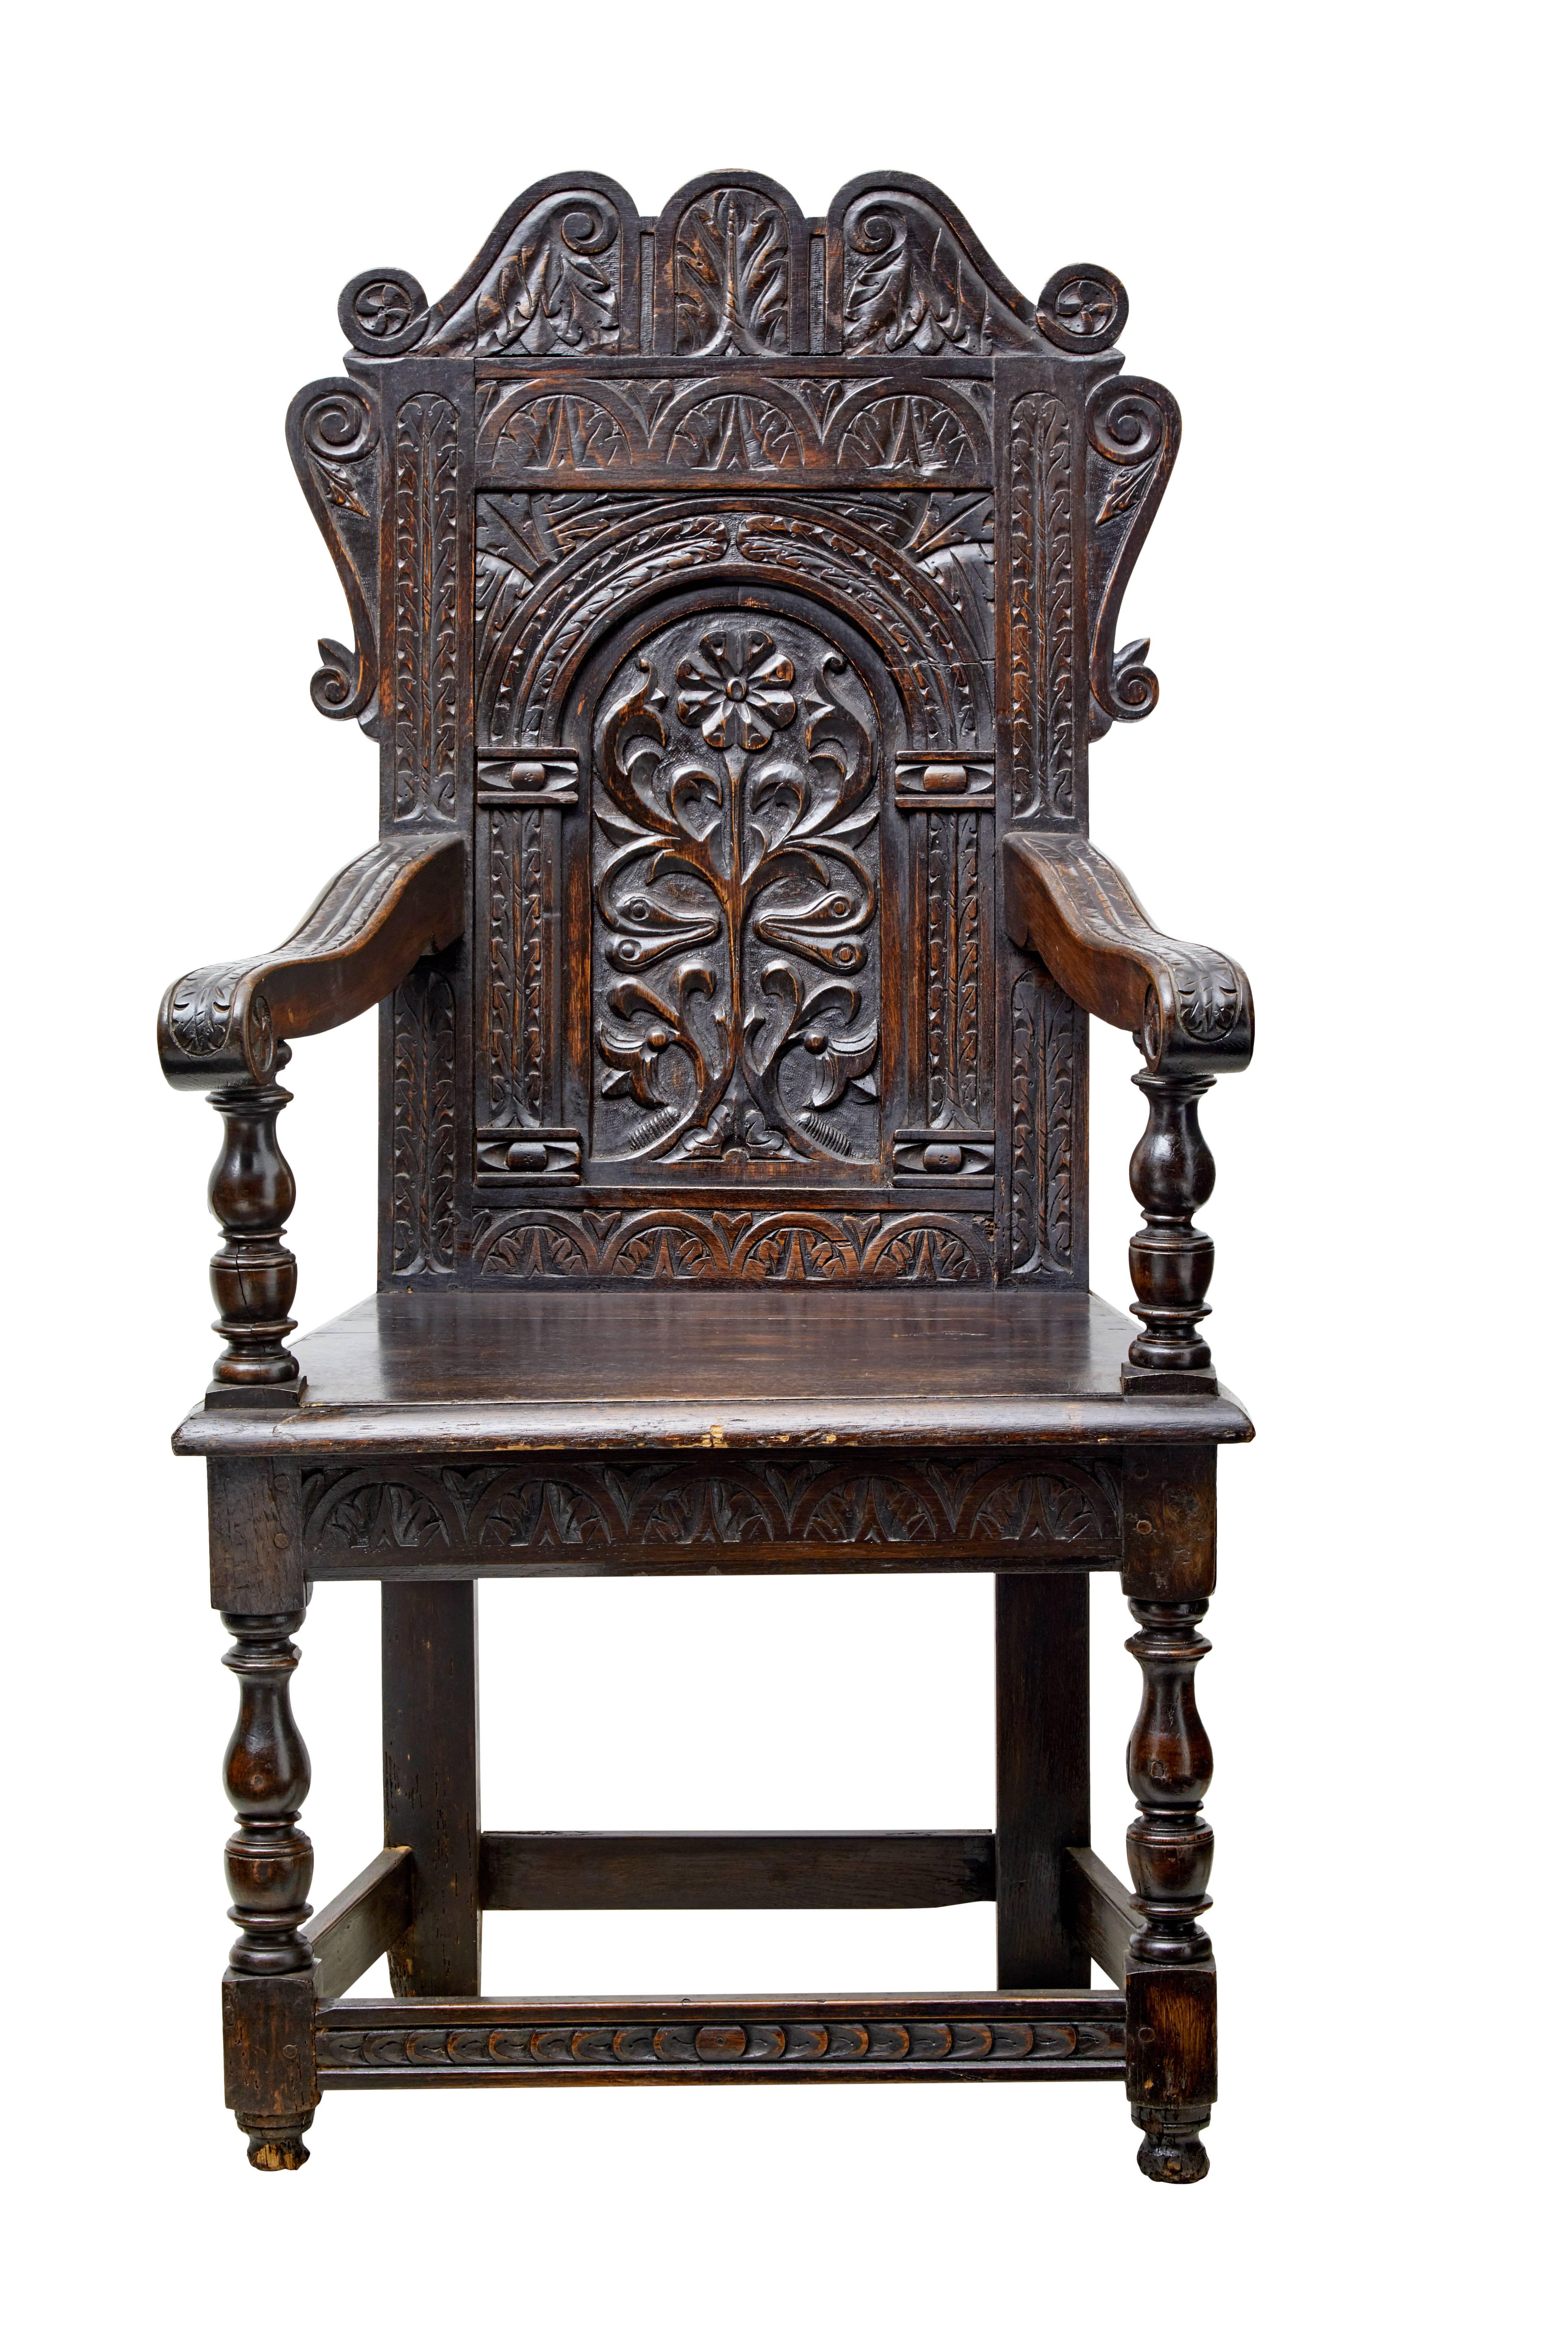 Good quality carved oak wainscot, circa 1870.

Made in the 19th century using earlier elements which shows the beautifully carved back rest.

Scrolling arms supported by turned supports. Front turned legs united by rail.

Measures: Arm height